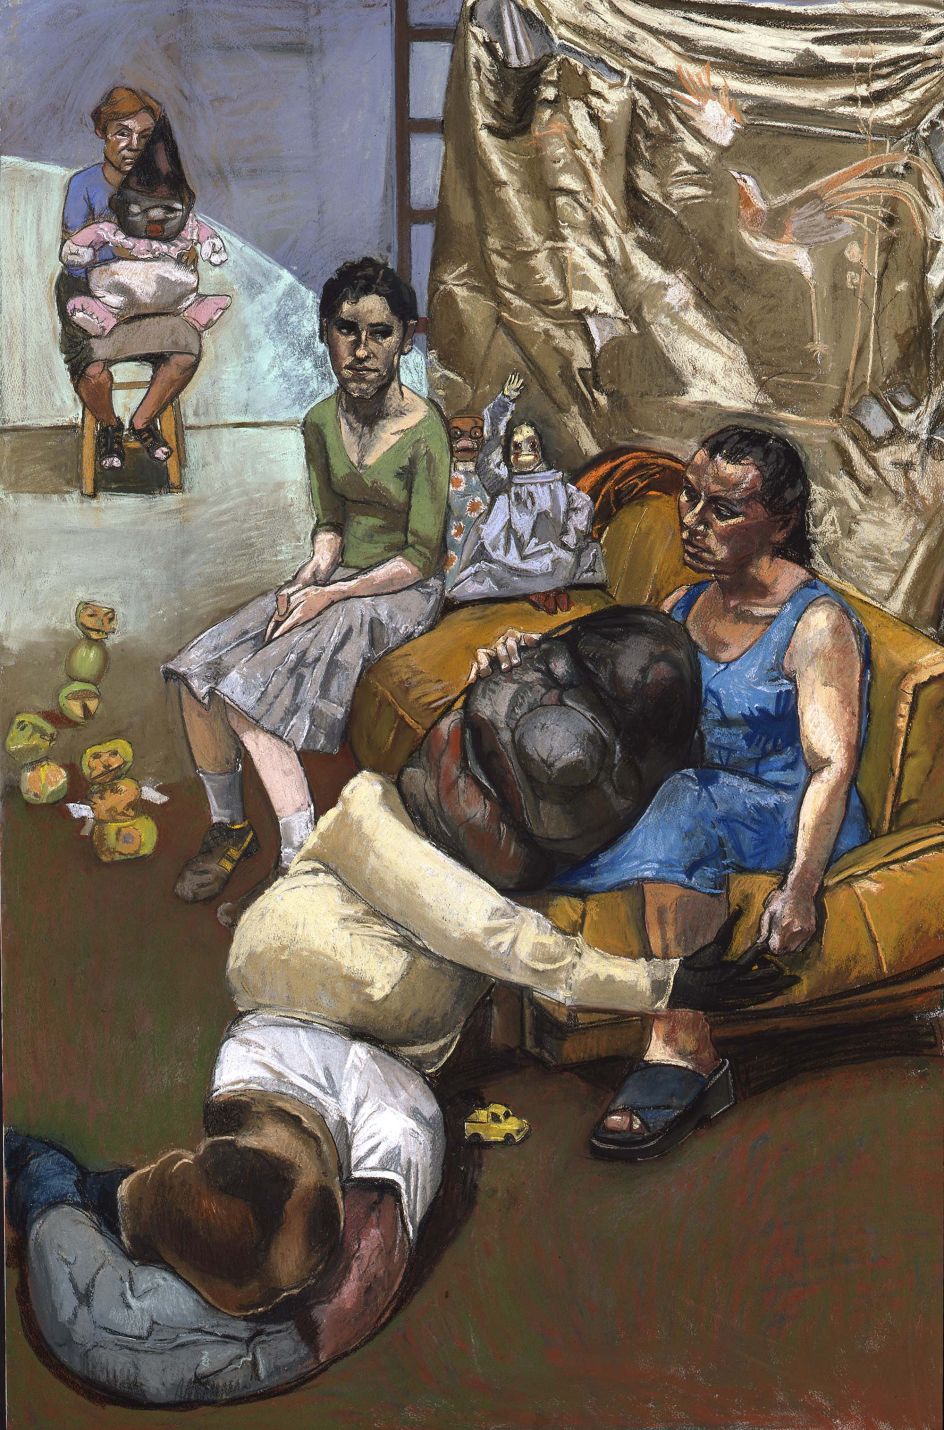 Paula REGO (b. 1935) The Pillowman, 2004, (right-hand panel of a triptych) Pastel on board, 180 x 120 cm Collection: Private Collection © Paula Rego, courtesy of Marlborough, New York and London